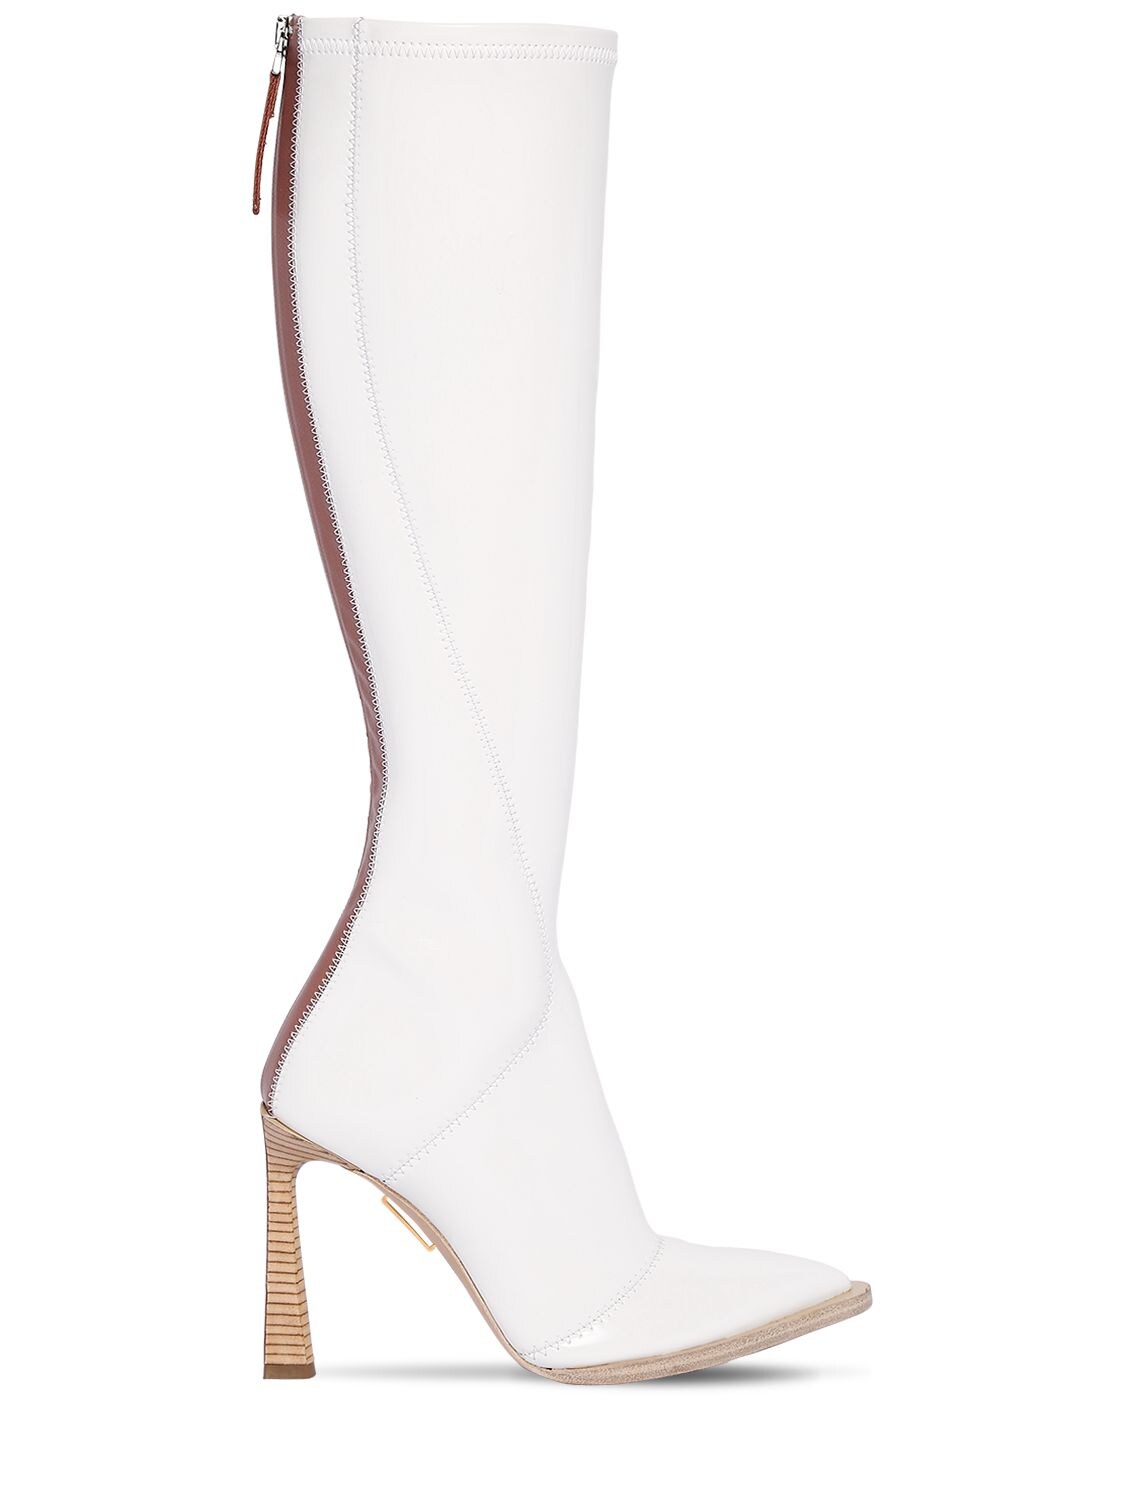 Fendi 105mm Faux Patent Leather Tall Boots In White